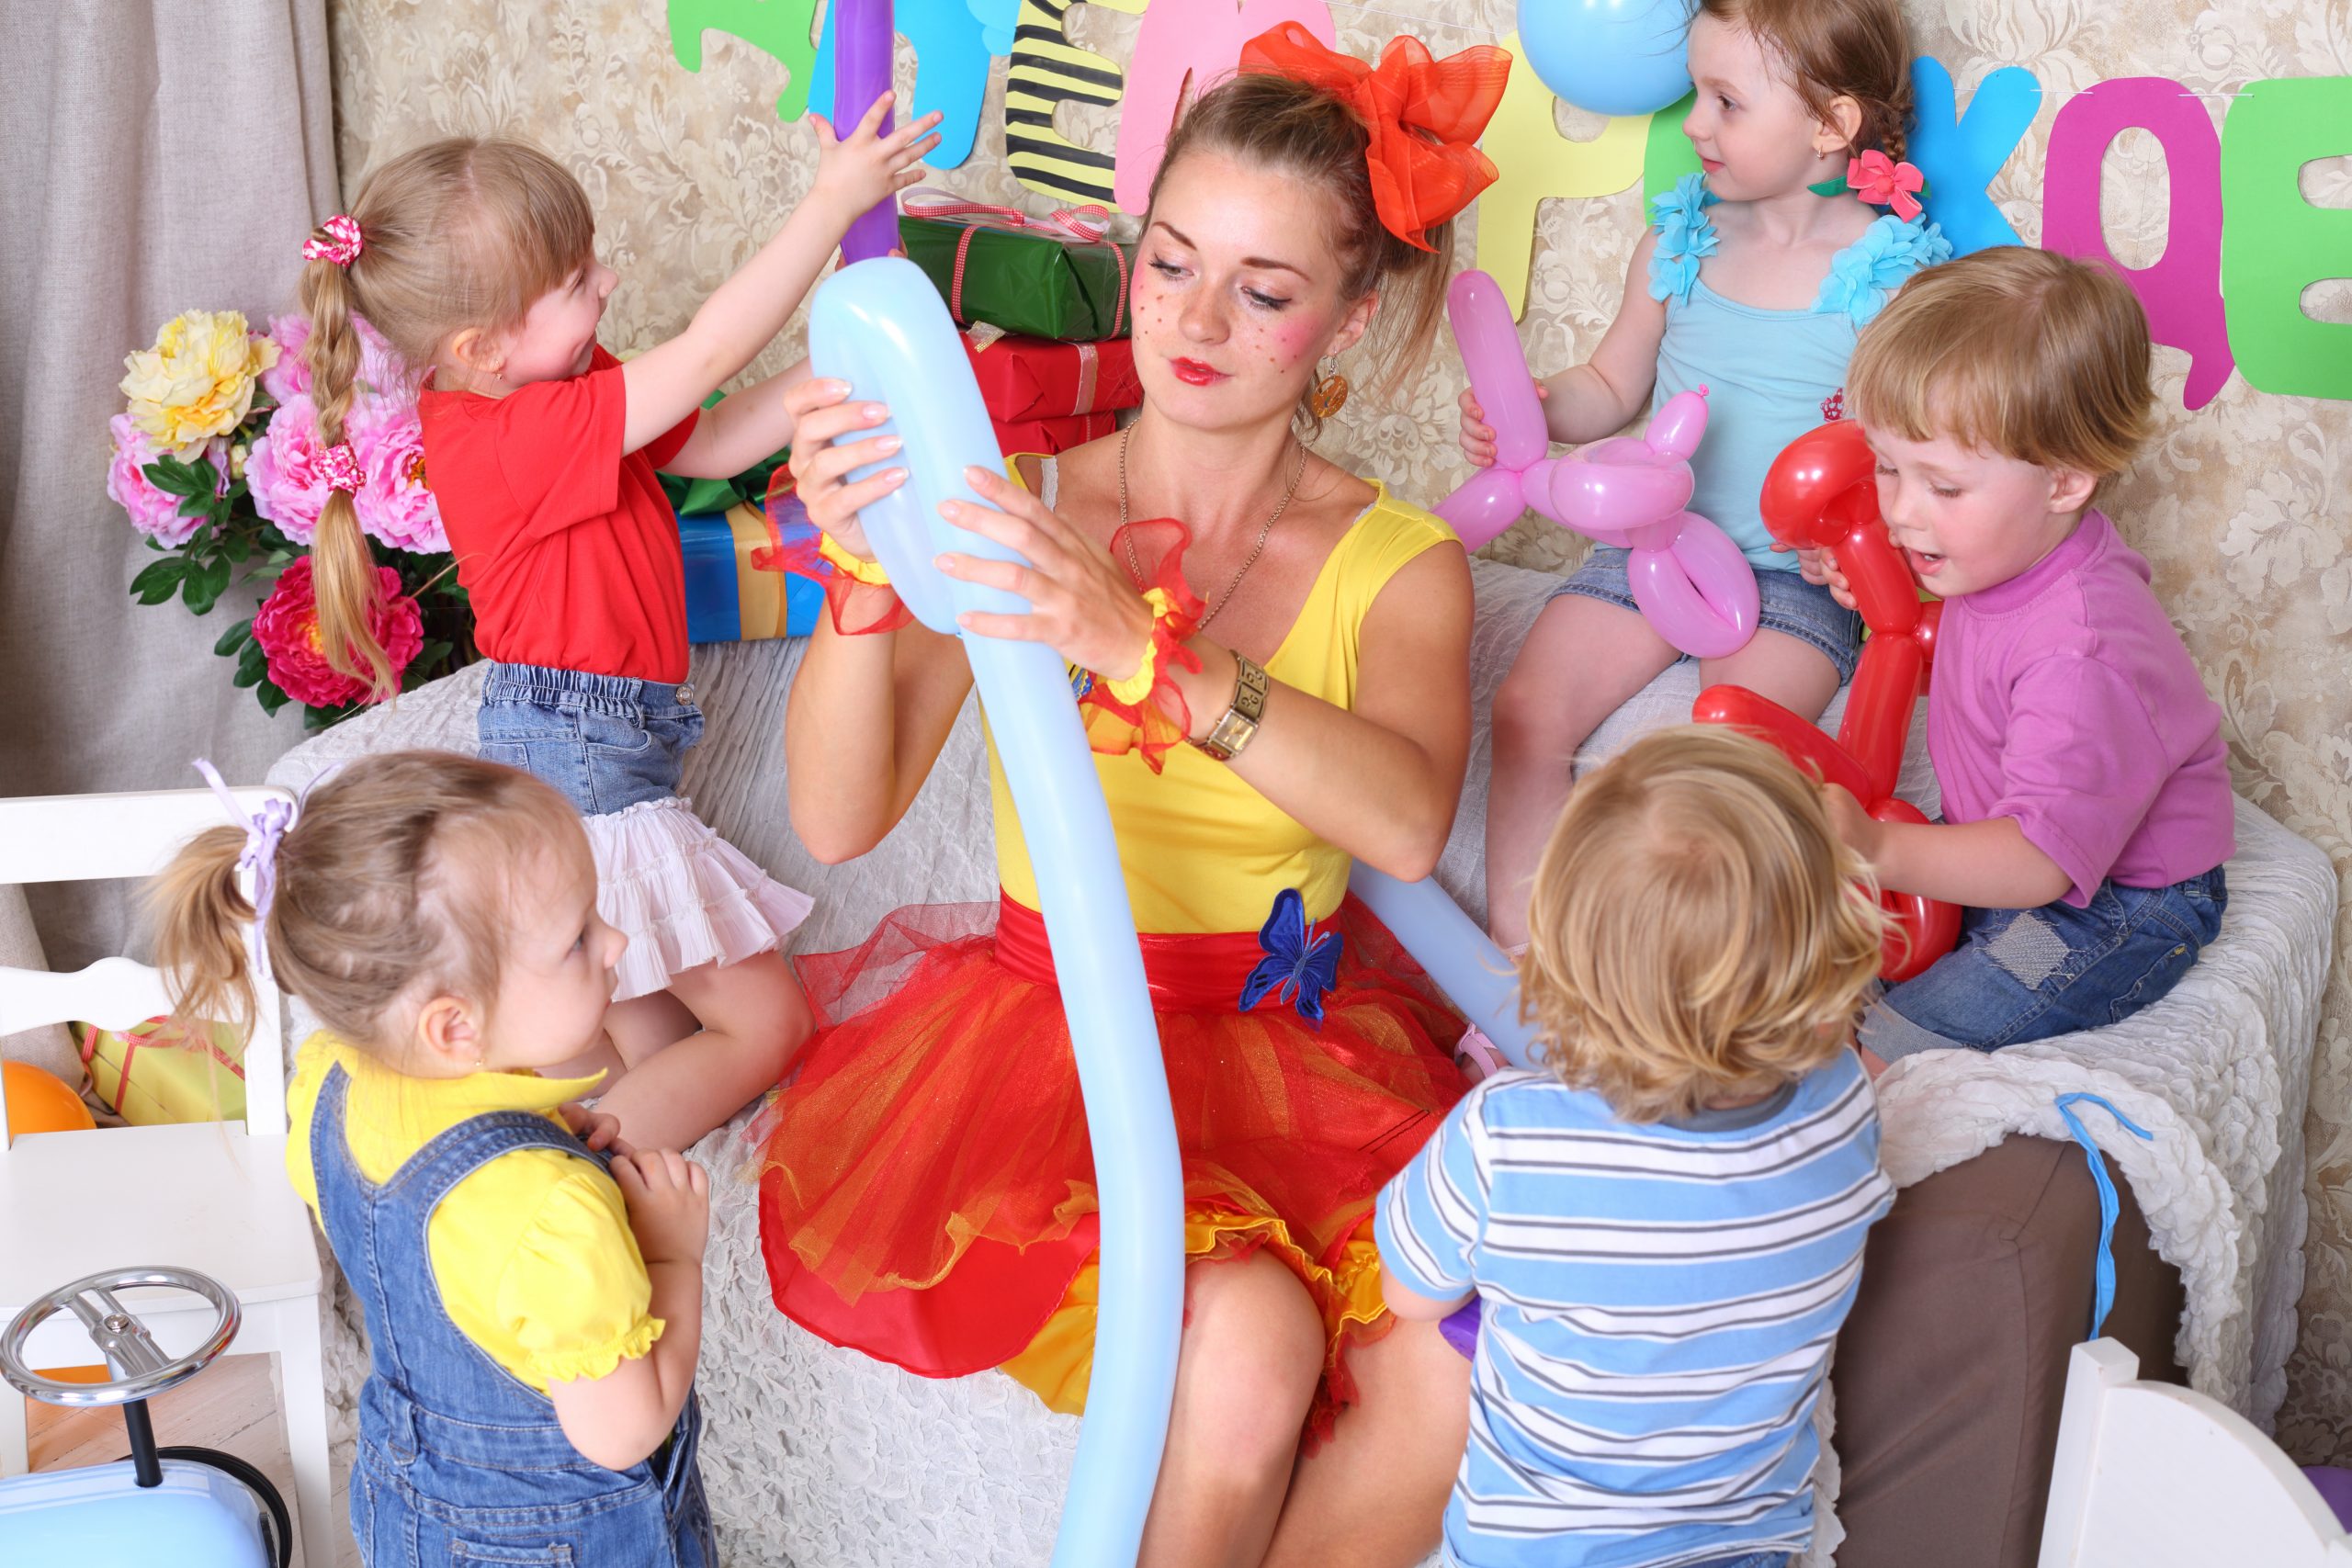 Kids Party in Your Backyard: How to Make It Fun and Stress-Free